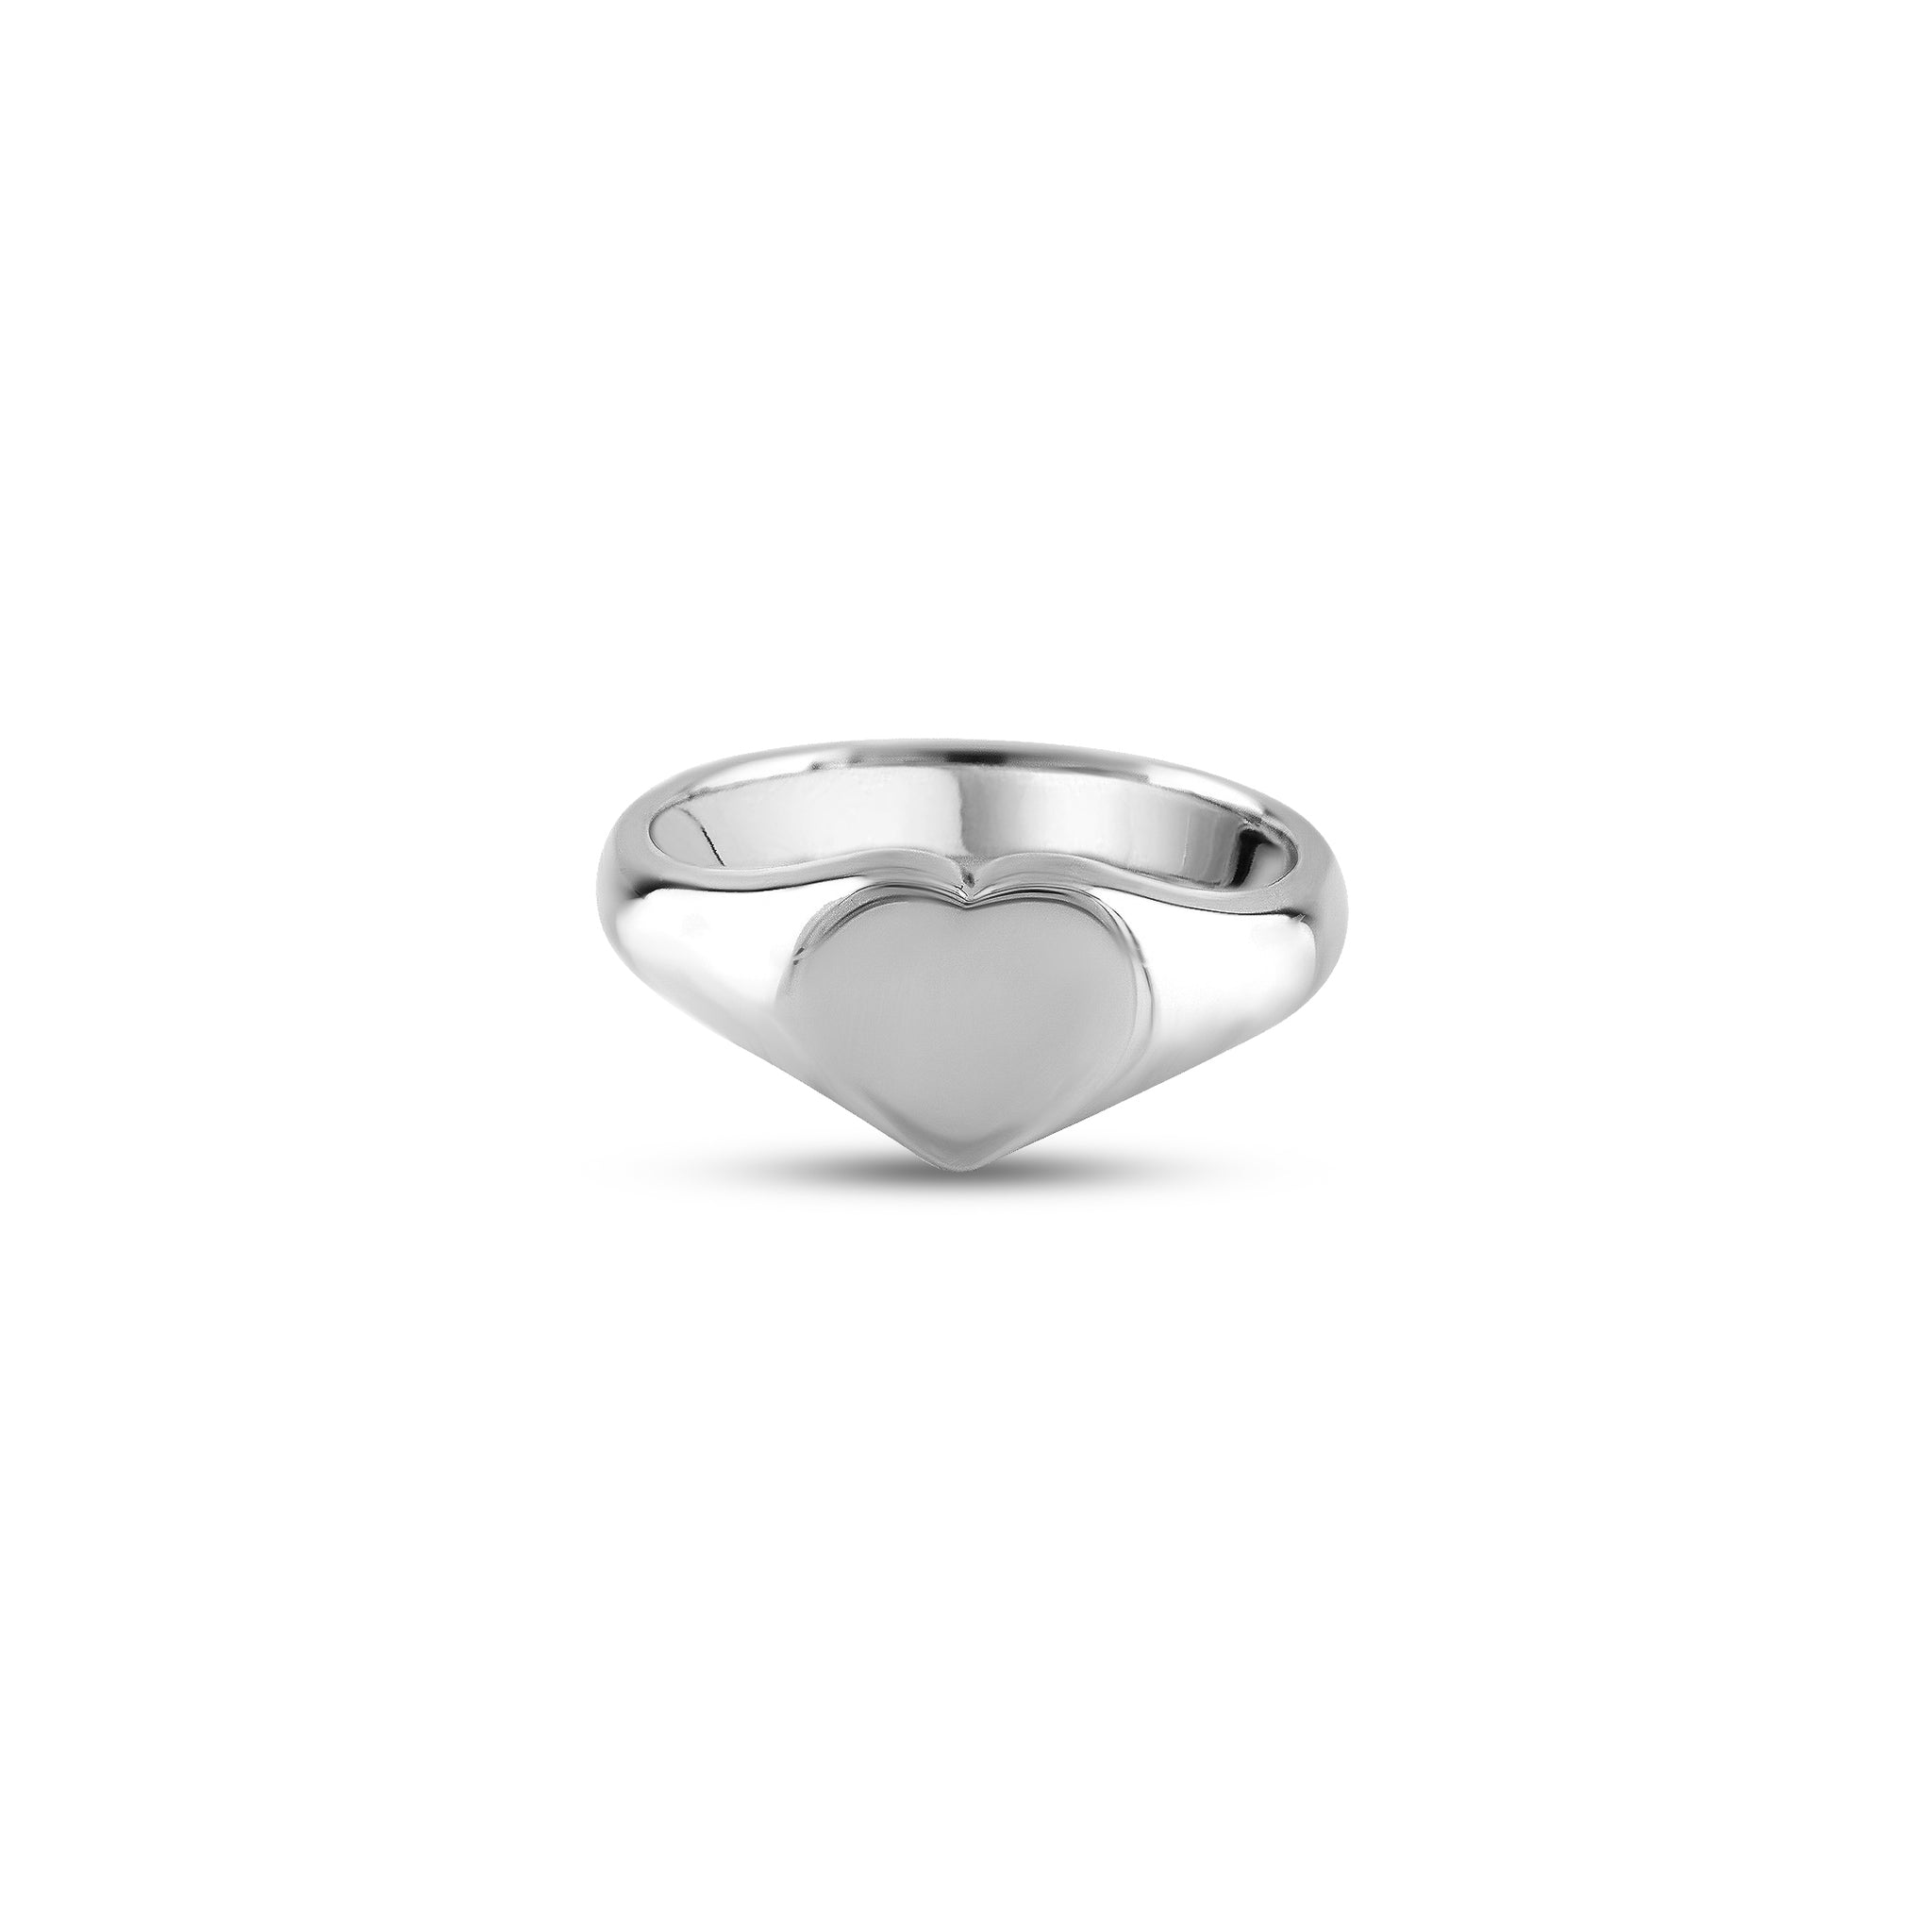 Silver 9 x 9mm Heart Signet Ring